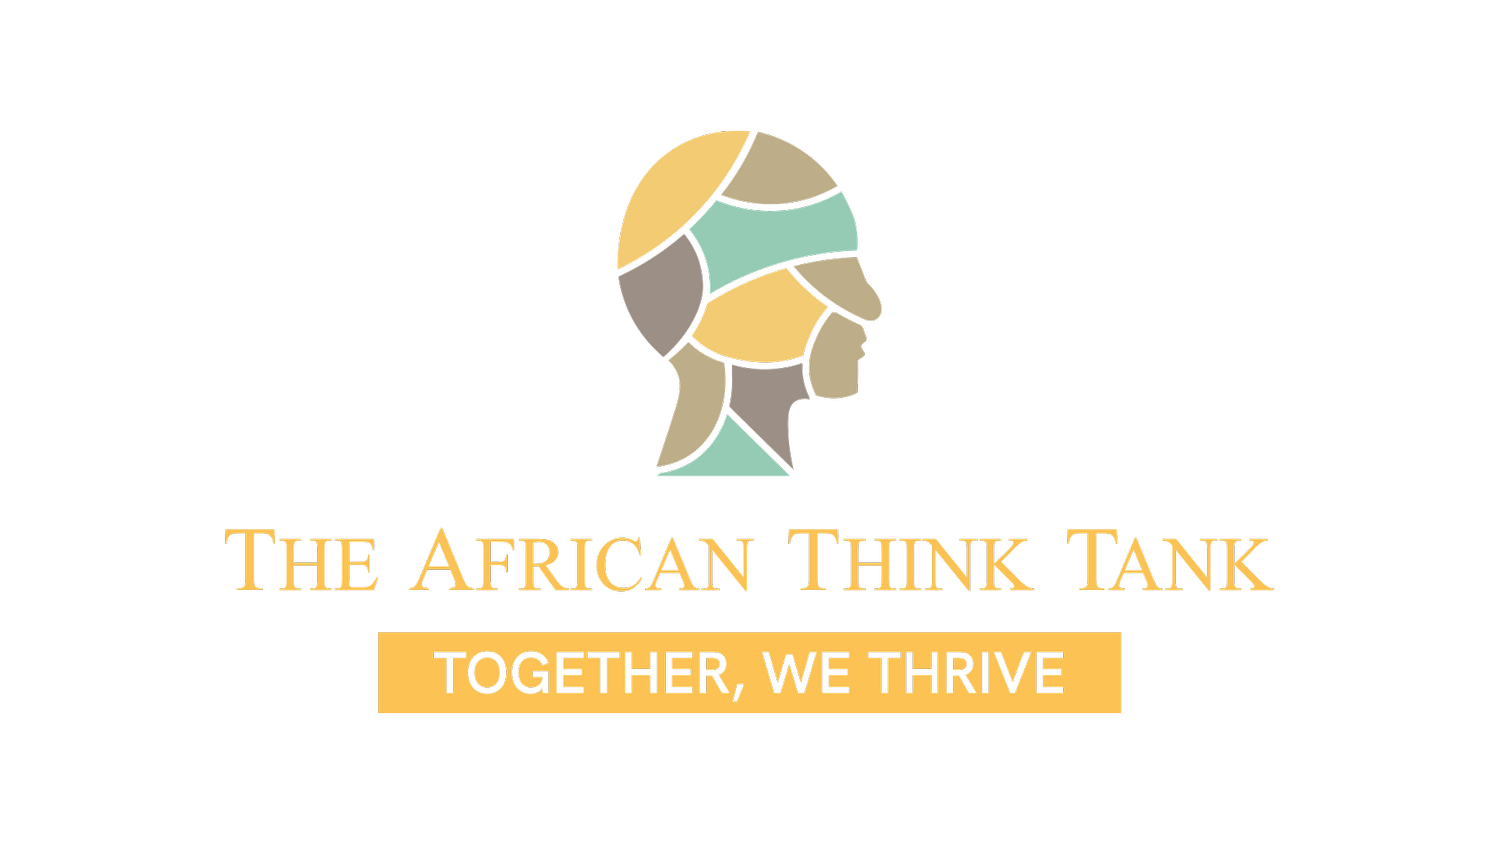 The African Think Tank